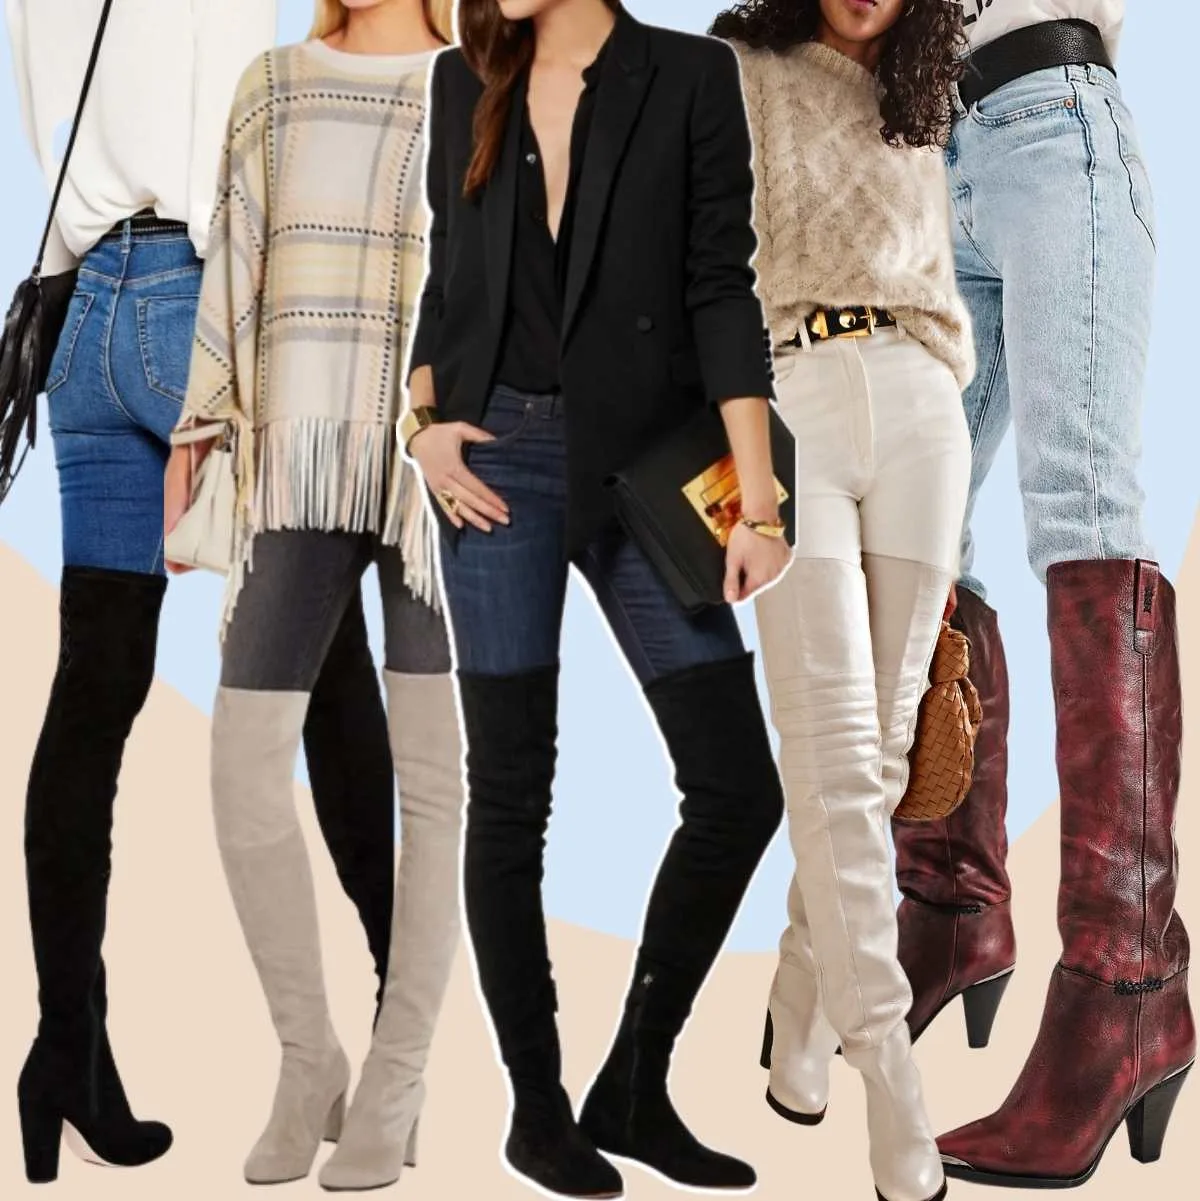 Collage of 5 women wearing different thigh high outfits with jeans.